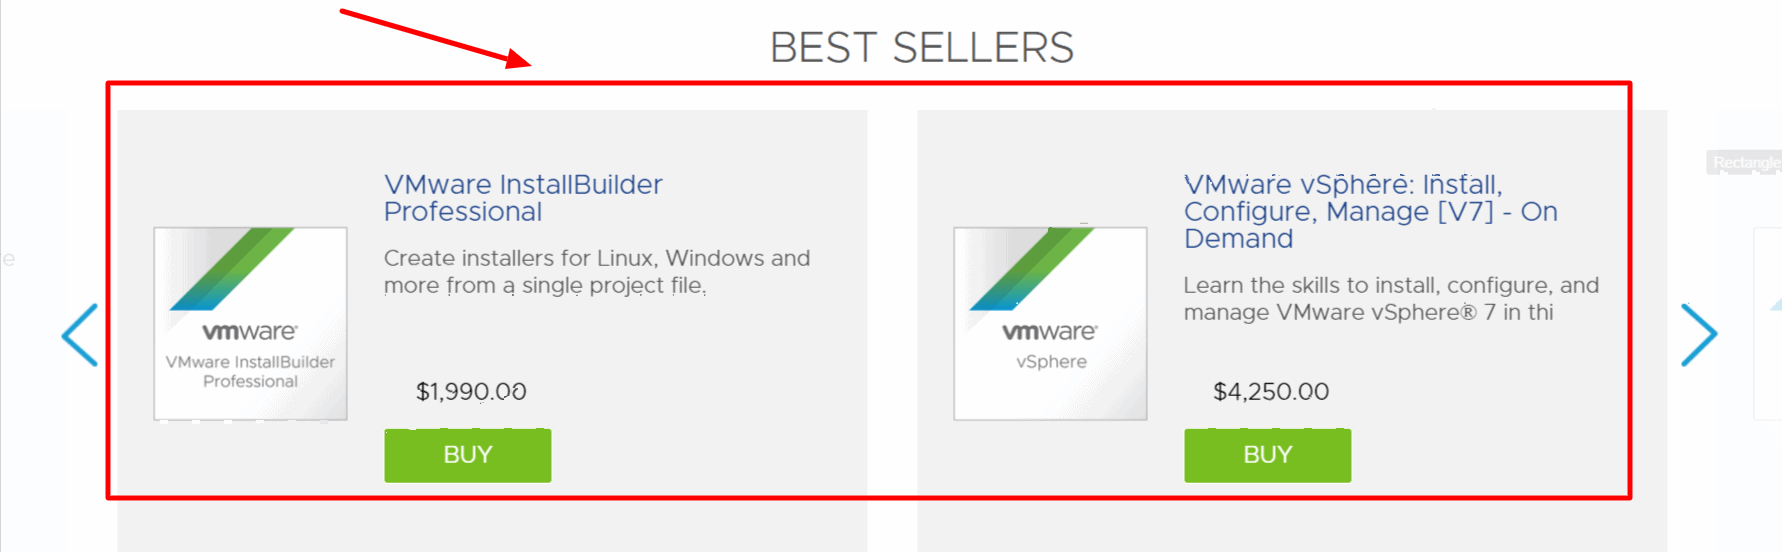 VMware Online Pricing- VMware fusion review